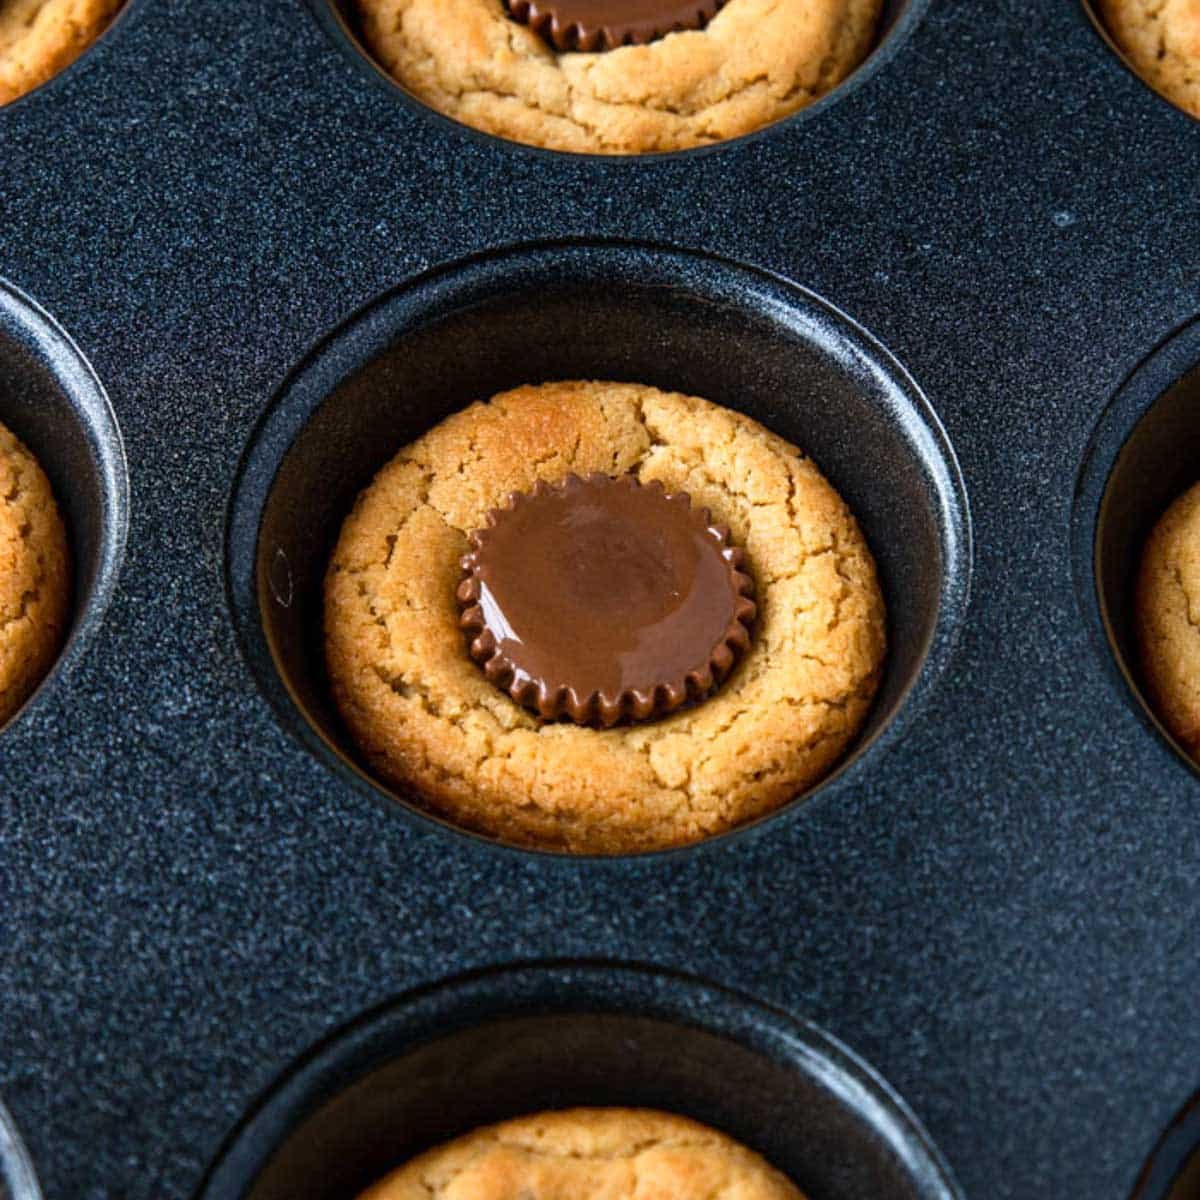 a photo of a Reece's peanut butter cup in a muffin tin